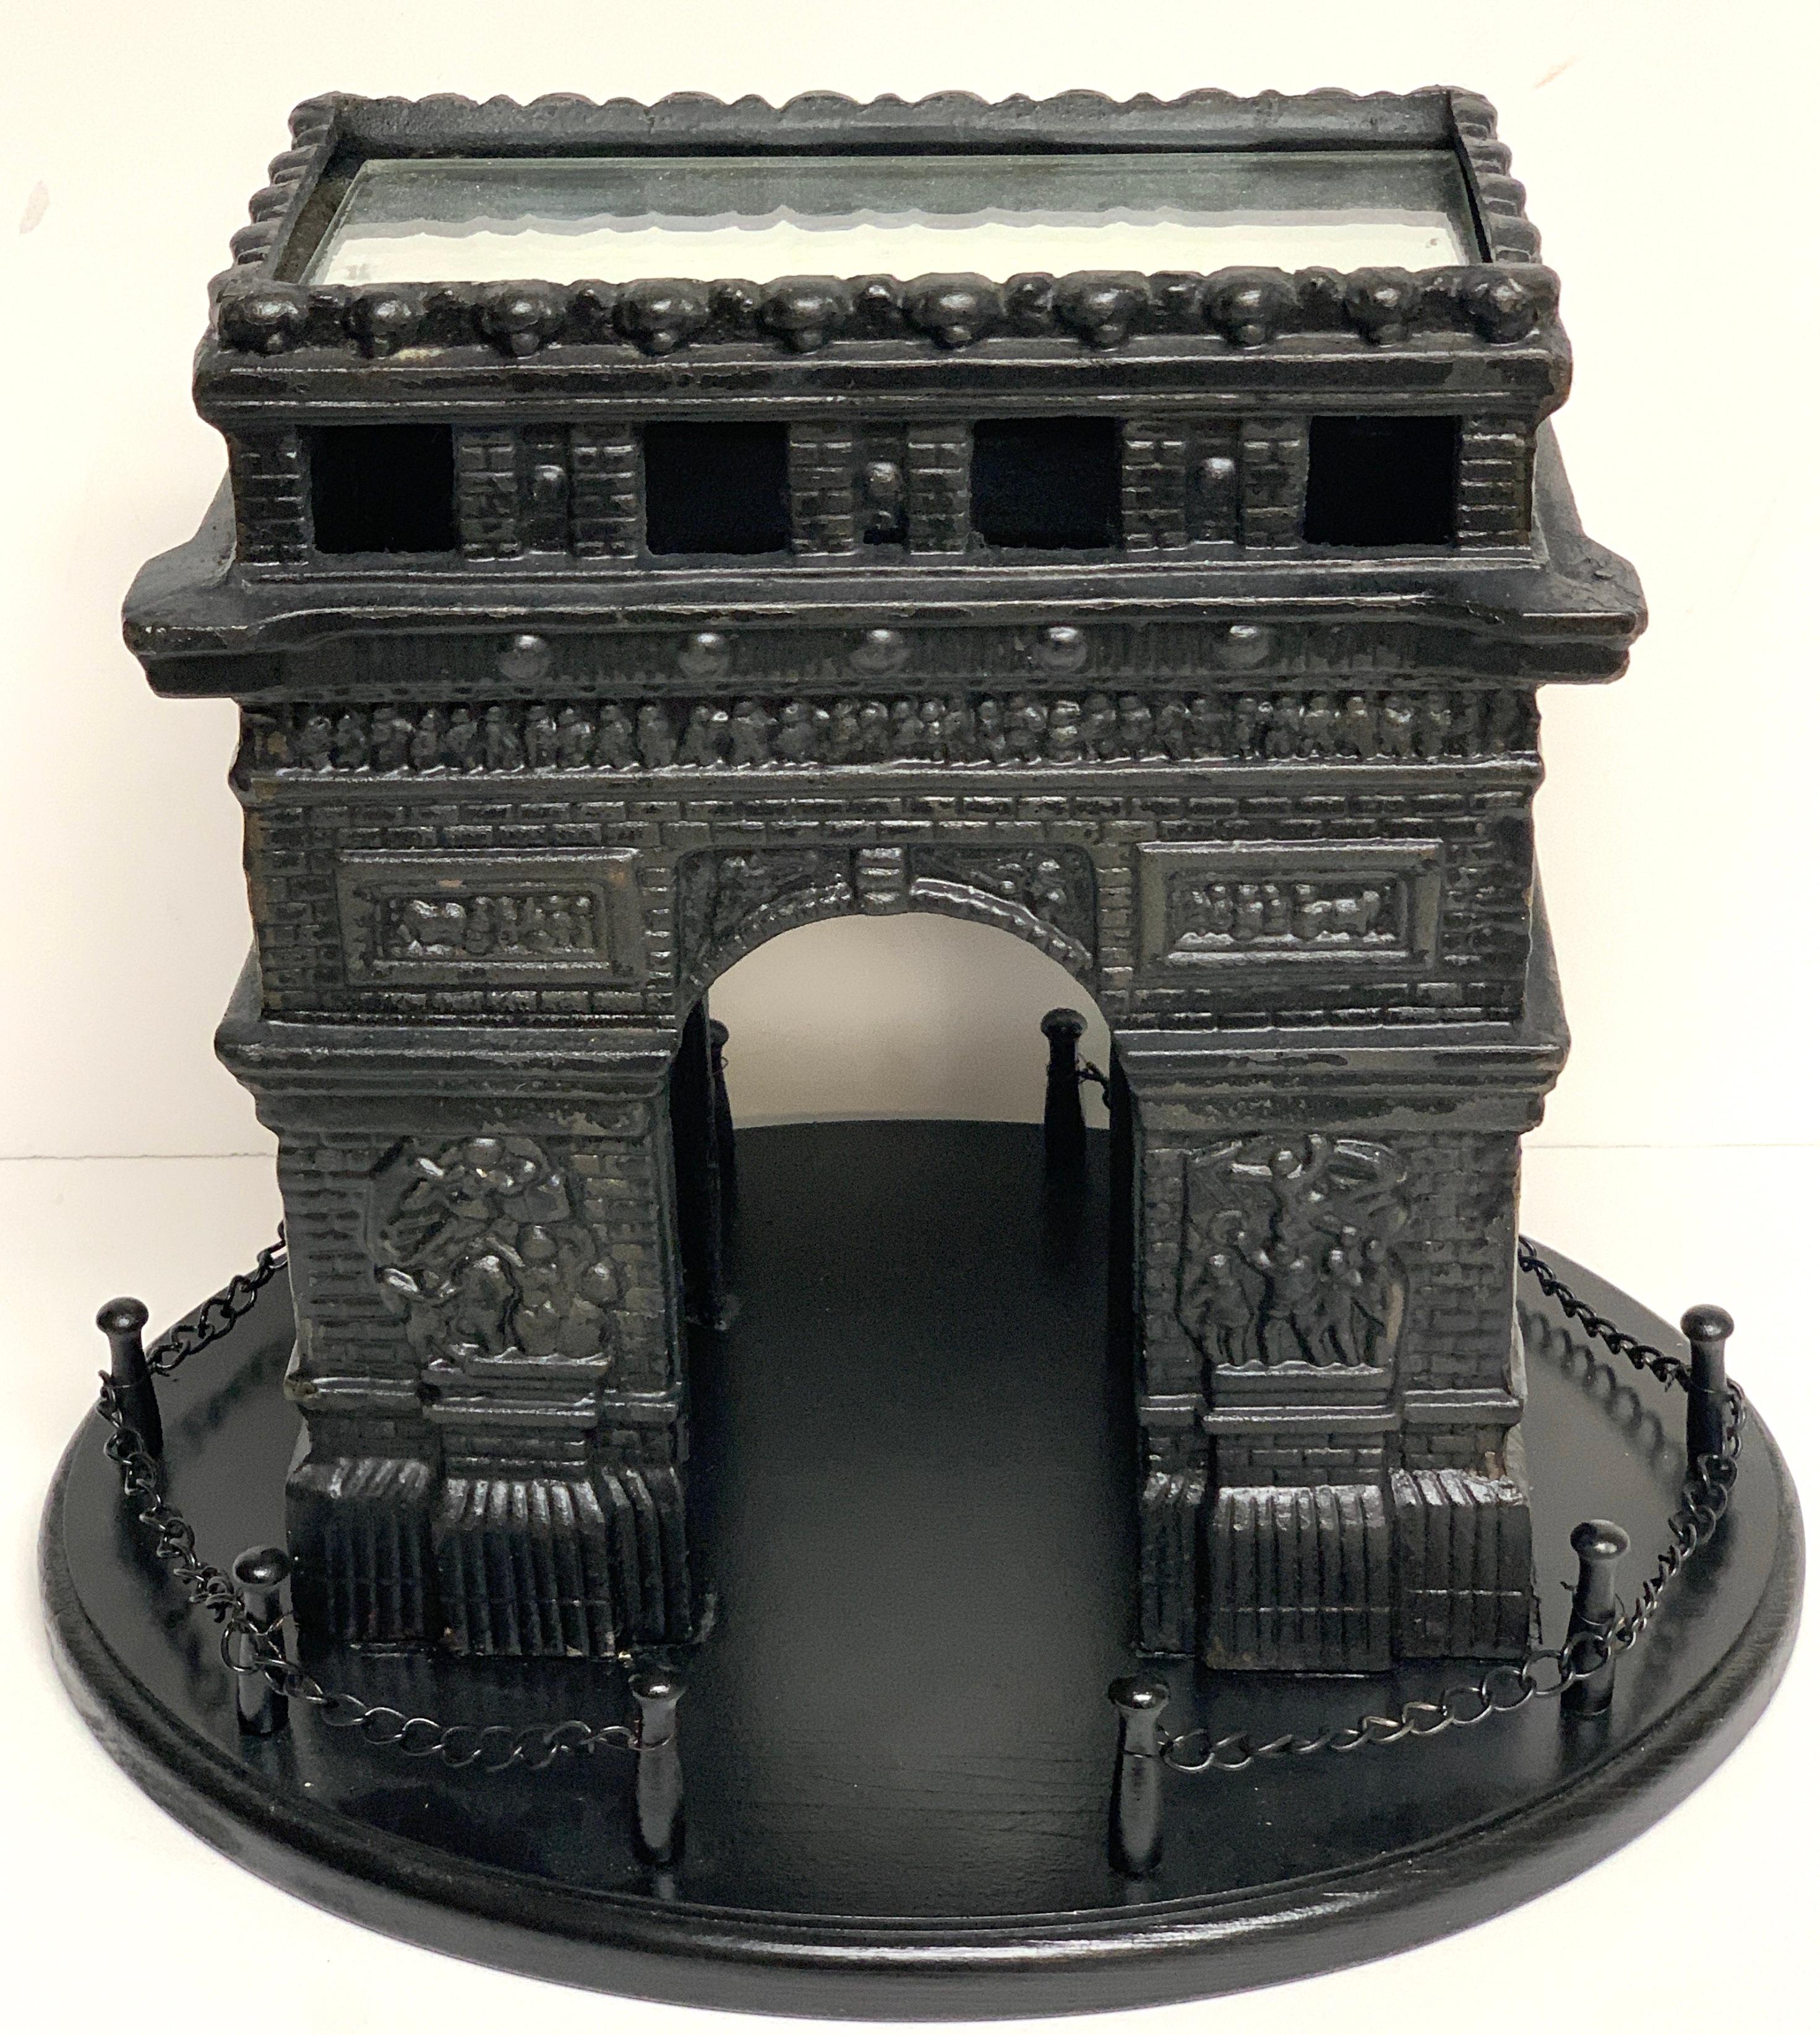 19th century French grand tour iron model of the Arc de Triomphe, in two parts, the fine cast iron model of the Arc de Triomphe with a mirrored top. Raised on a oval ebonized wood and metal chain link fenced base
Model of Arc de Triomphe measures: